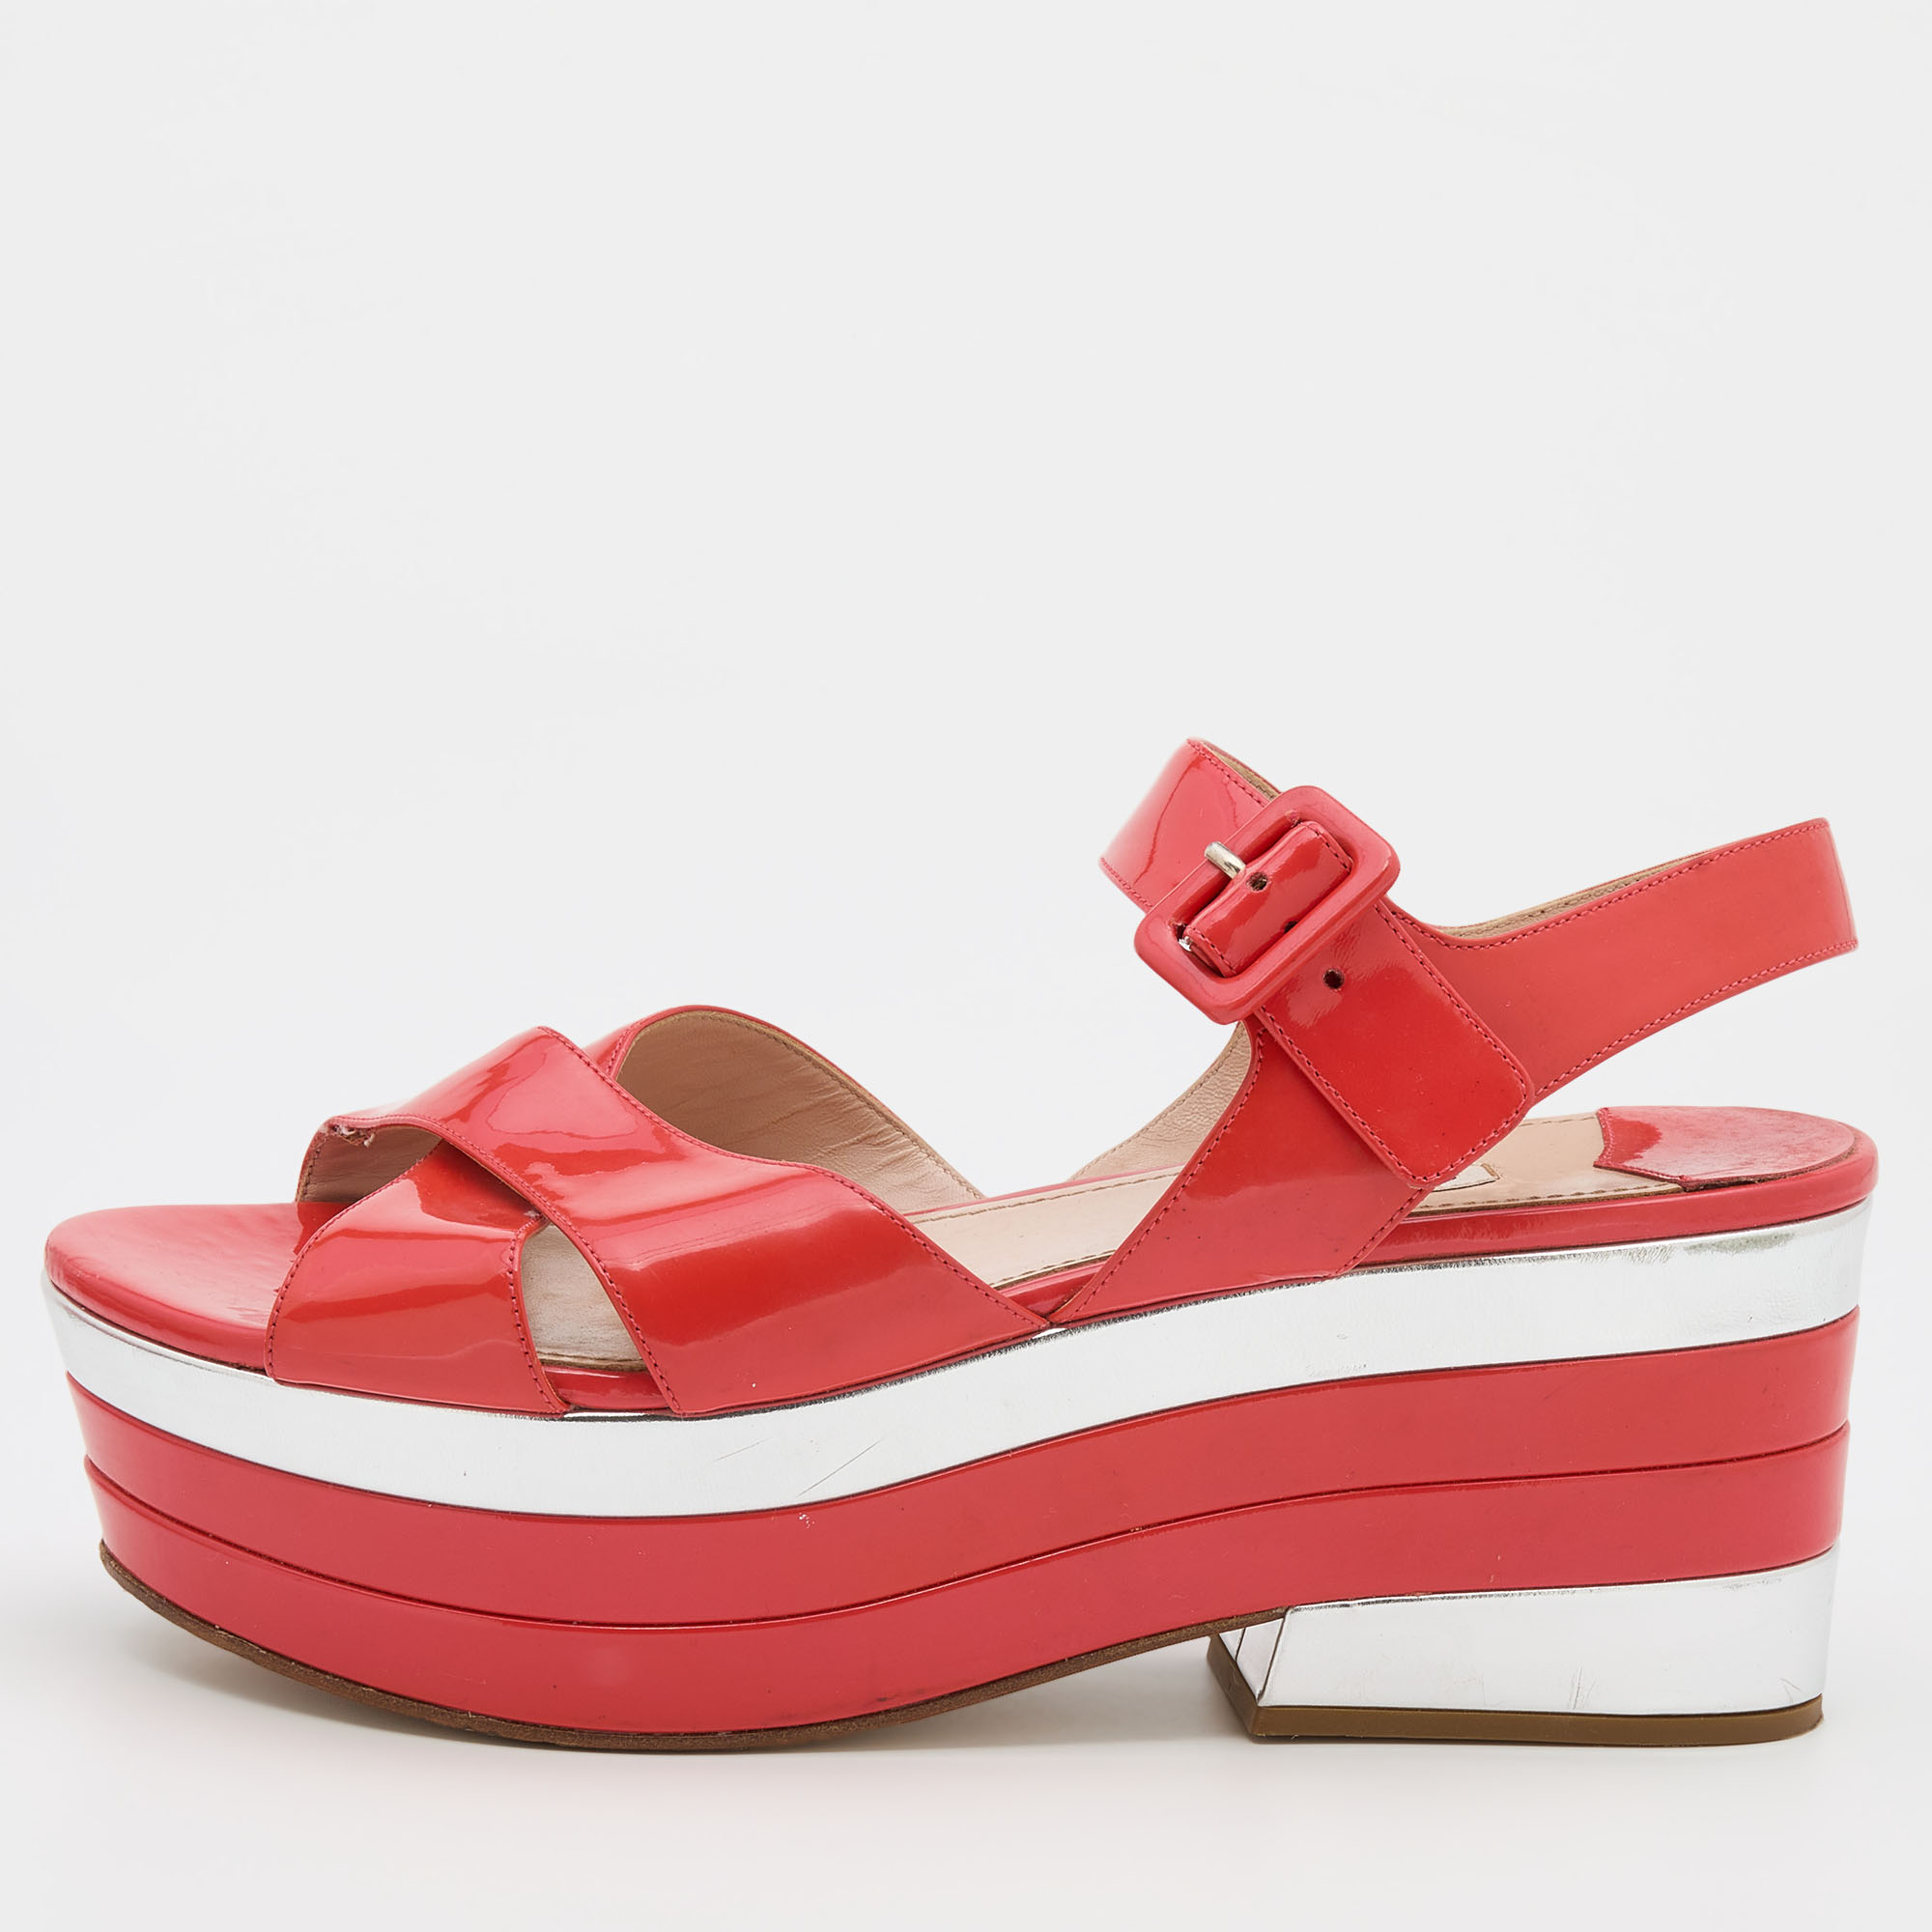 

Miu Miu Coral Red Patent Leather Wedge Platform Ankle Strap Sandals Size